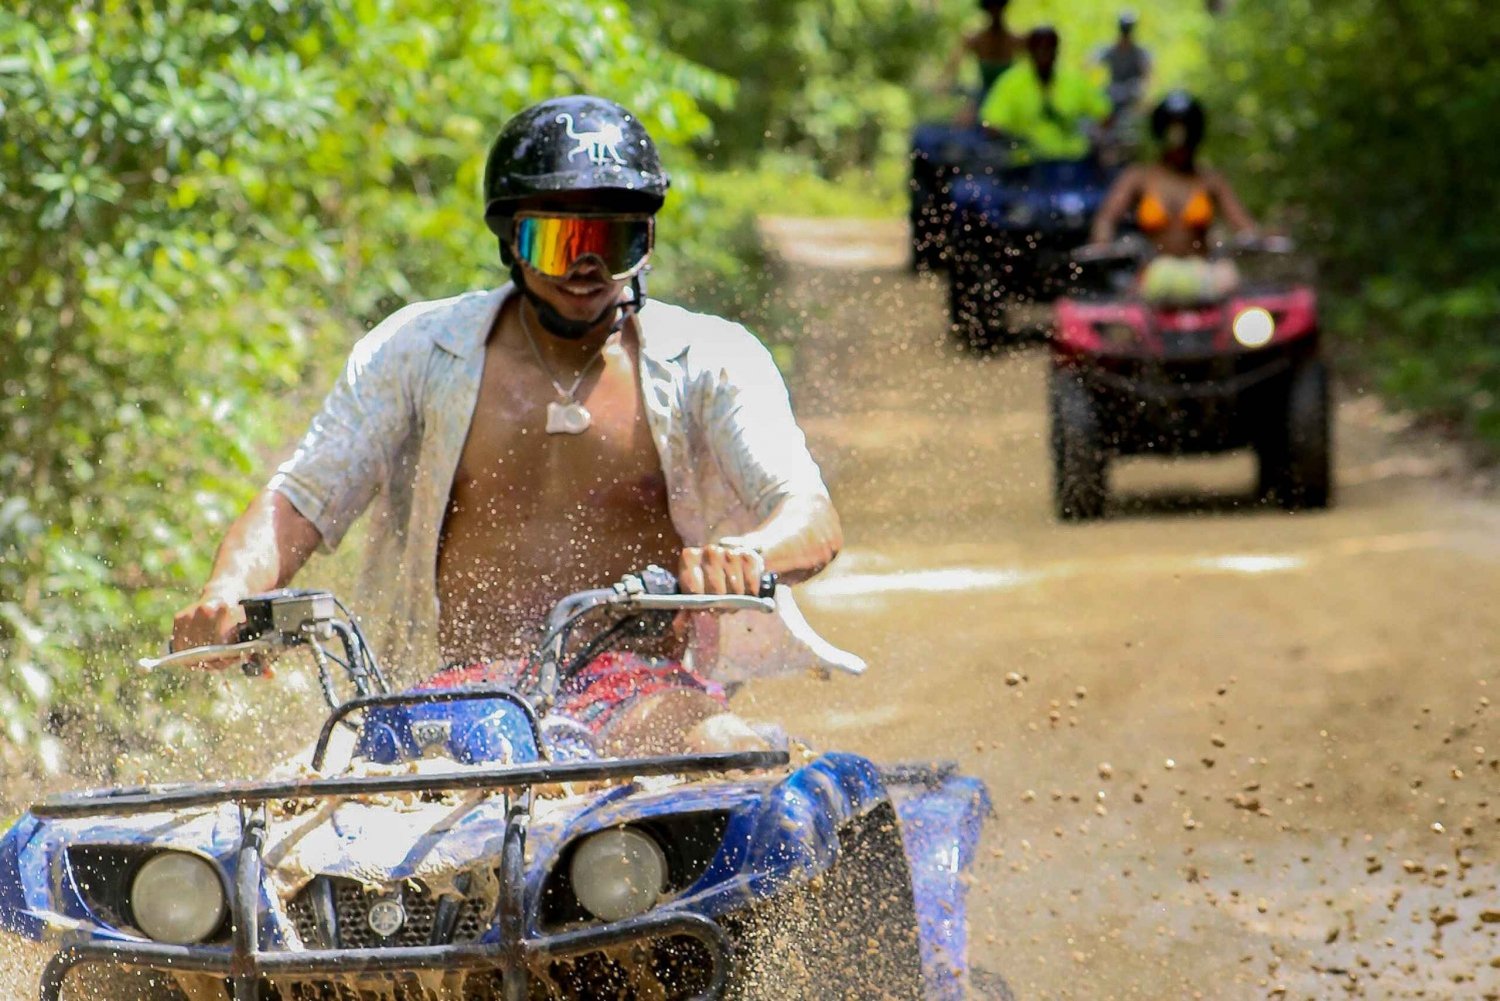 From Tulum: ATV Ride with Monkey Sanctuary and Cenote Trip